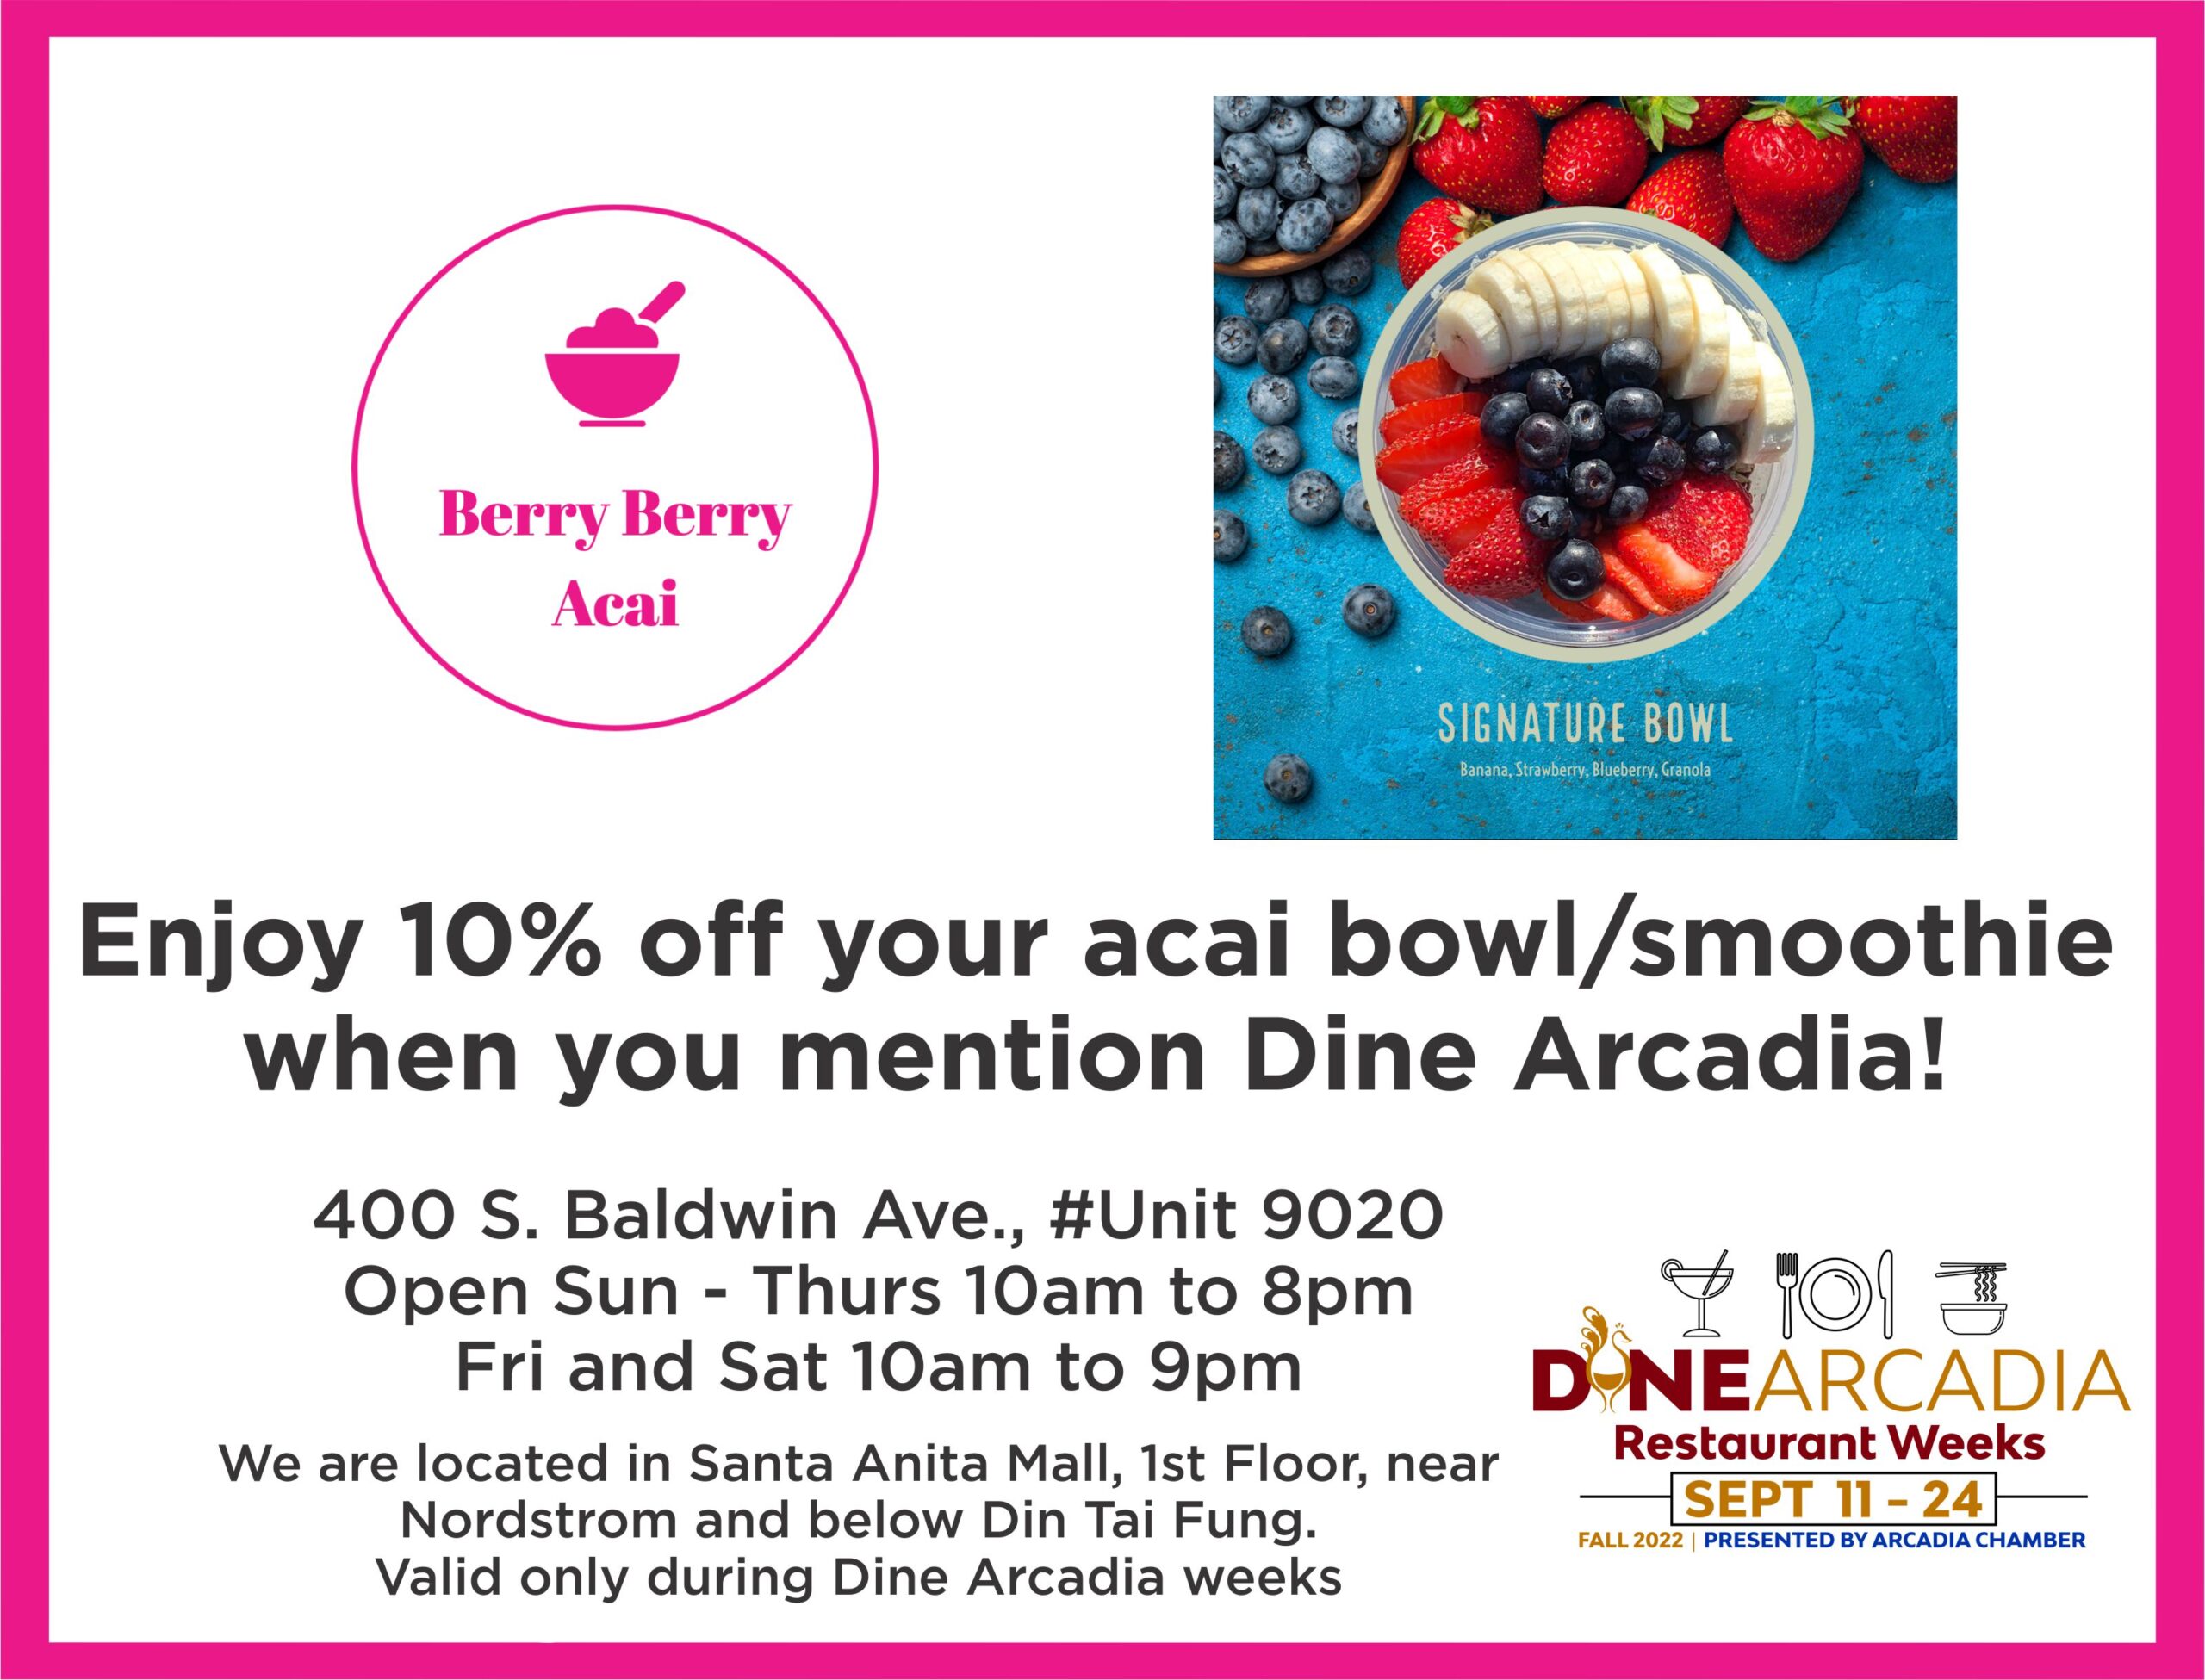 Berry Berry Acai Dine Arcadia flyer showing pink logo with acai bowl on blue background